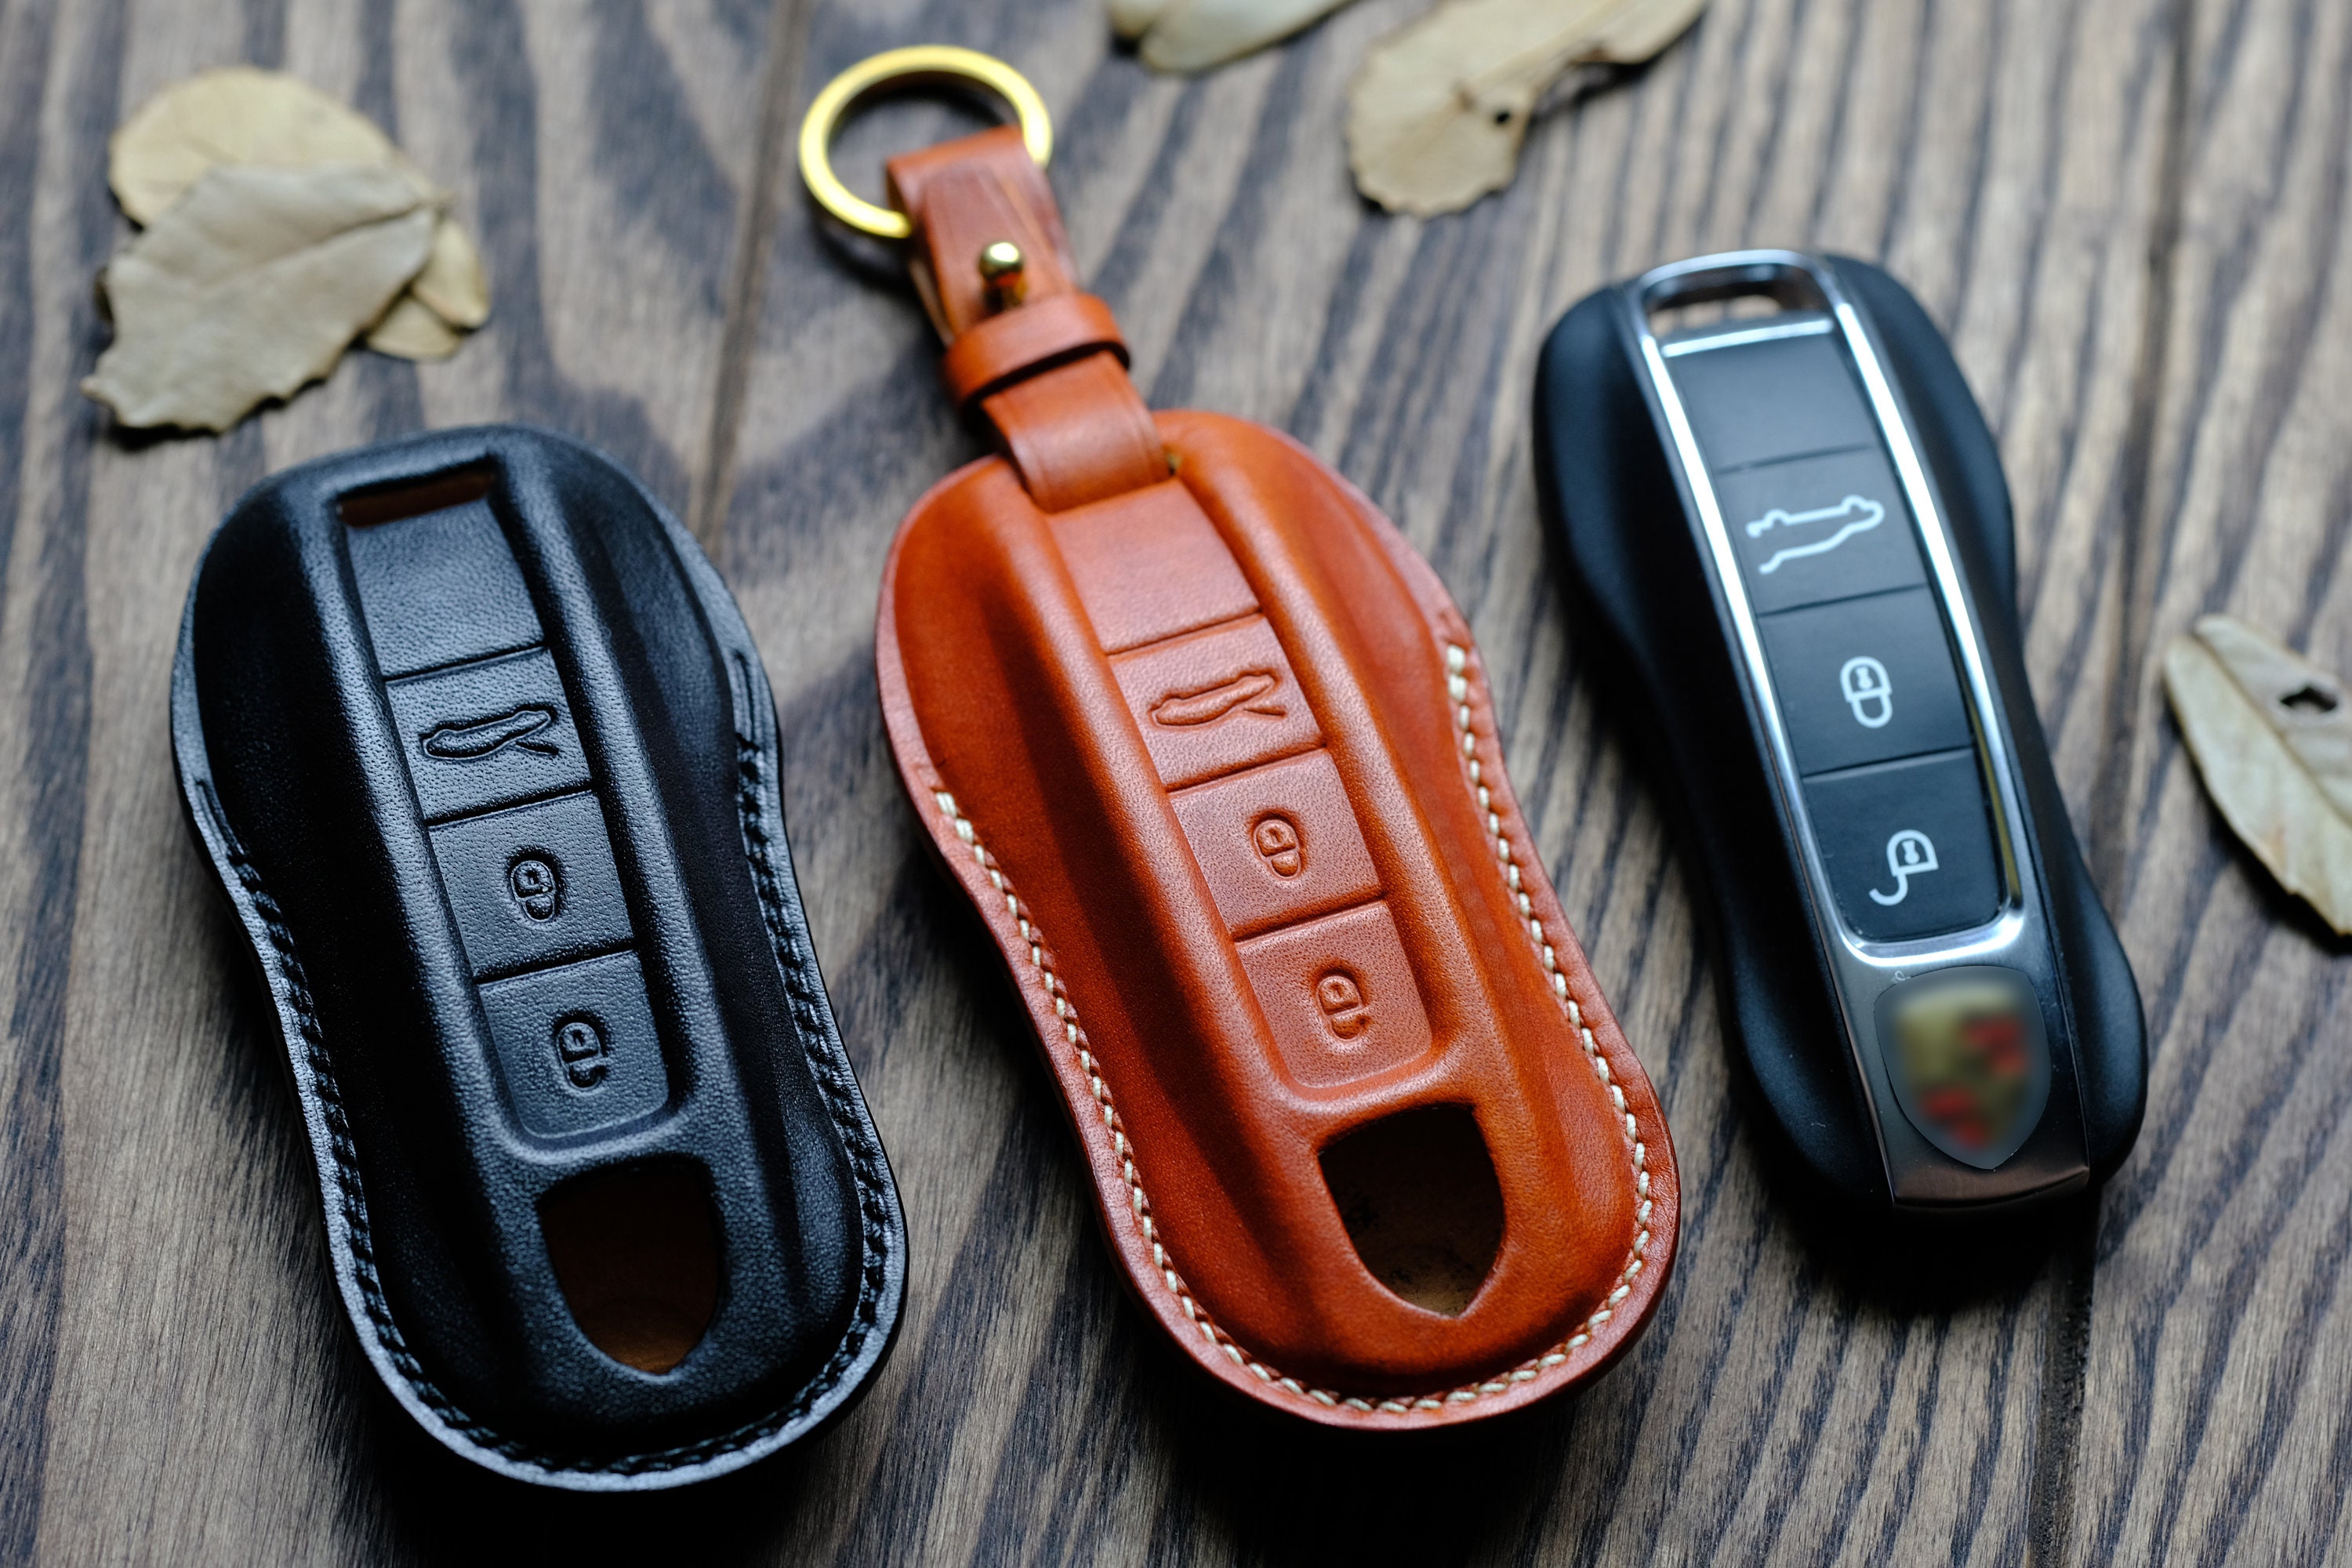 Buy Key Fob Protector Online In India -  India